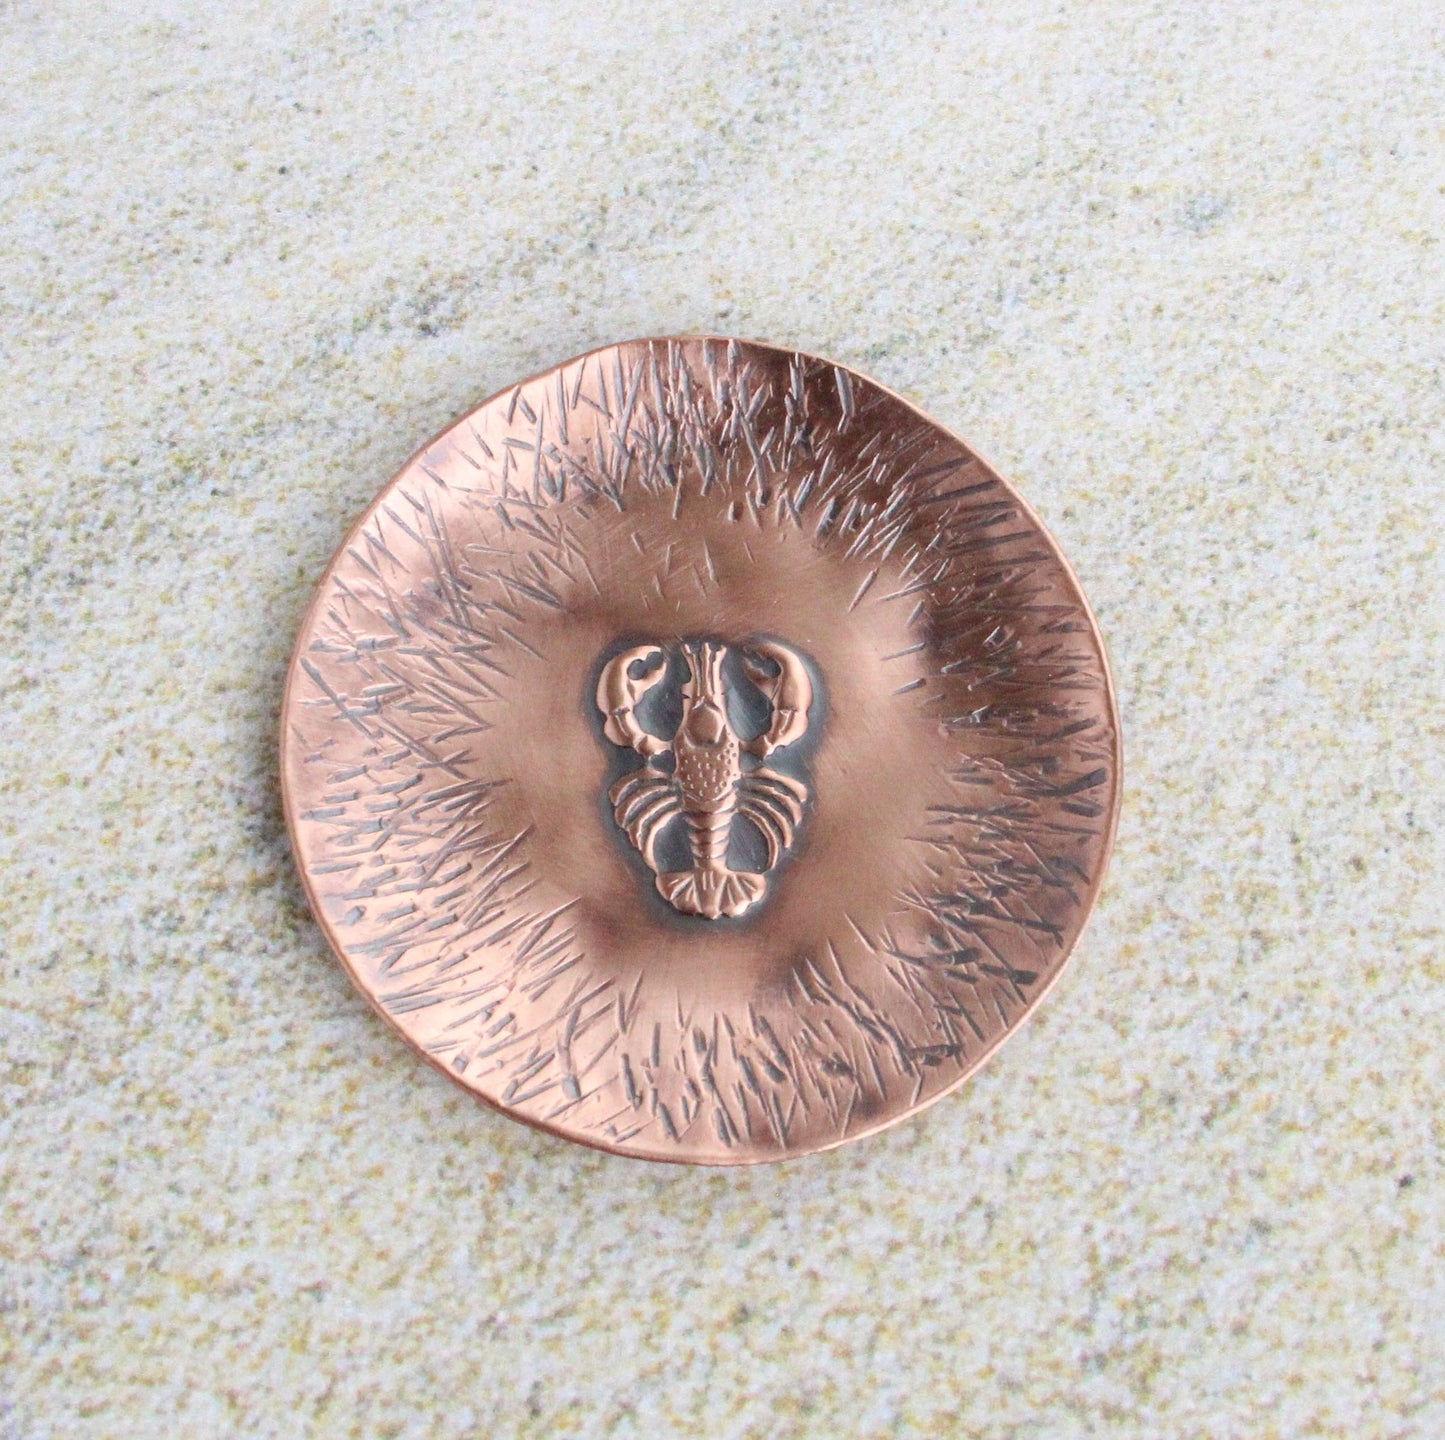 A 1-3/4 inch round copper ring or trinket dish. There is a raised detailed impression of a lobster in the middle and hammered lines around the edge. The bottom is flat and the sides are gently sloped. The bowl is oxidized to enhance the details of the lobster and the lines.